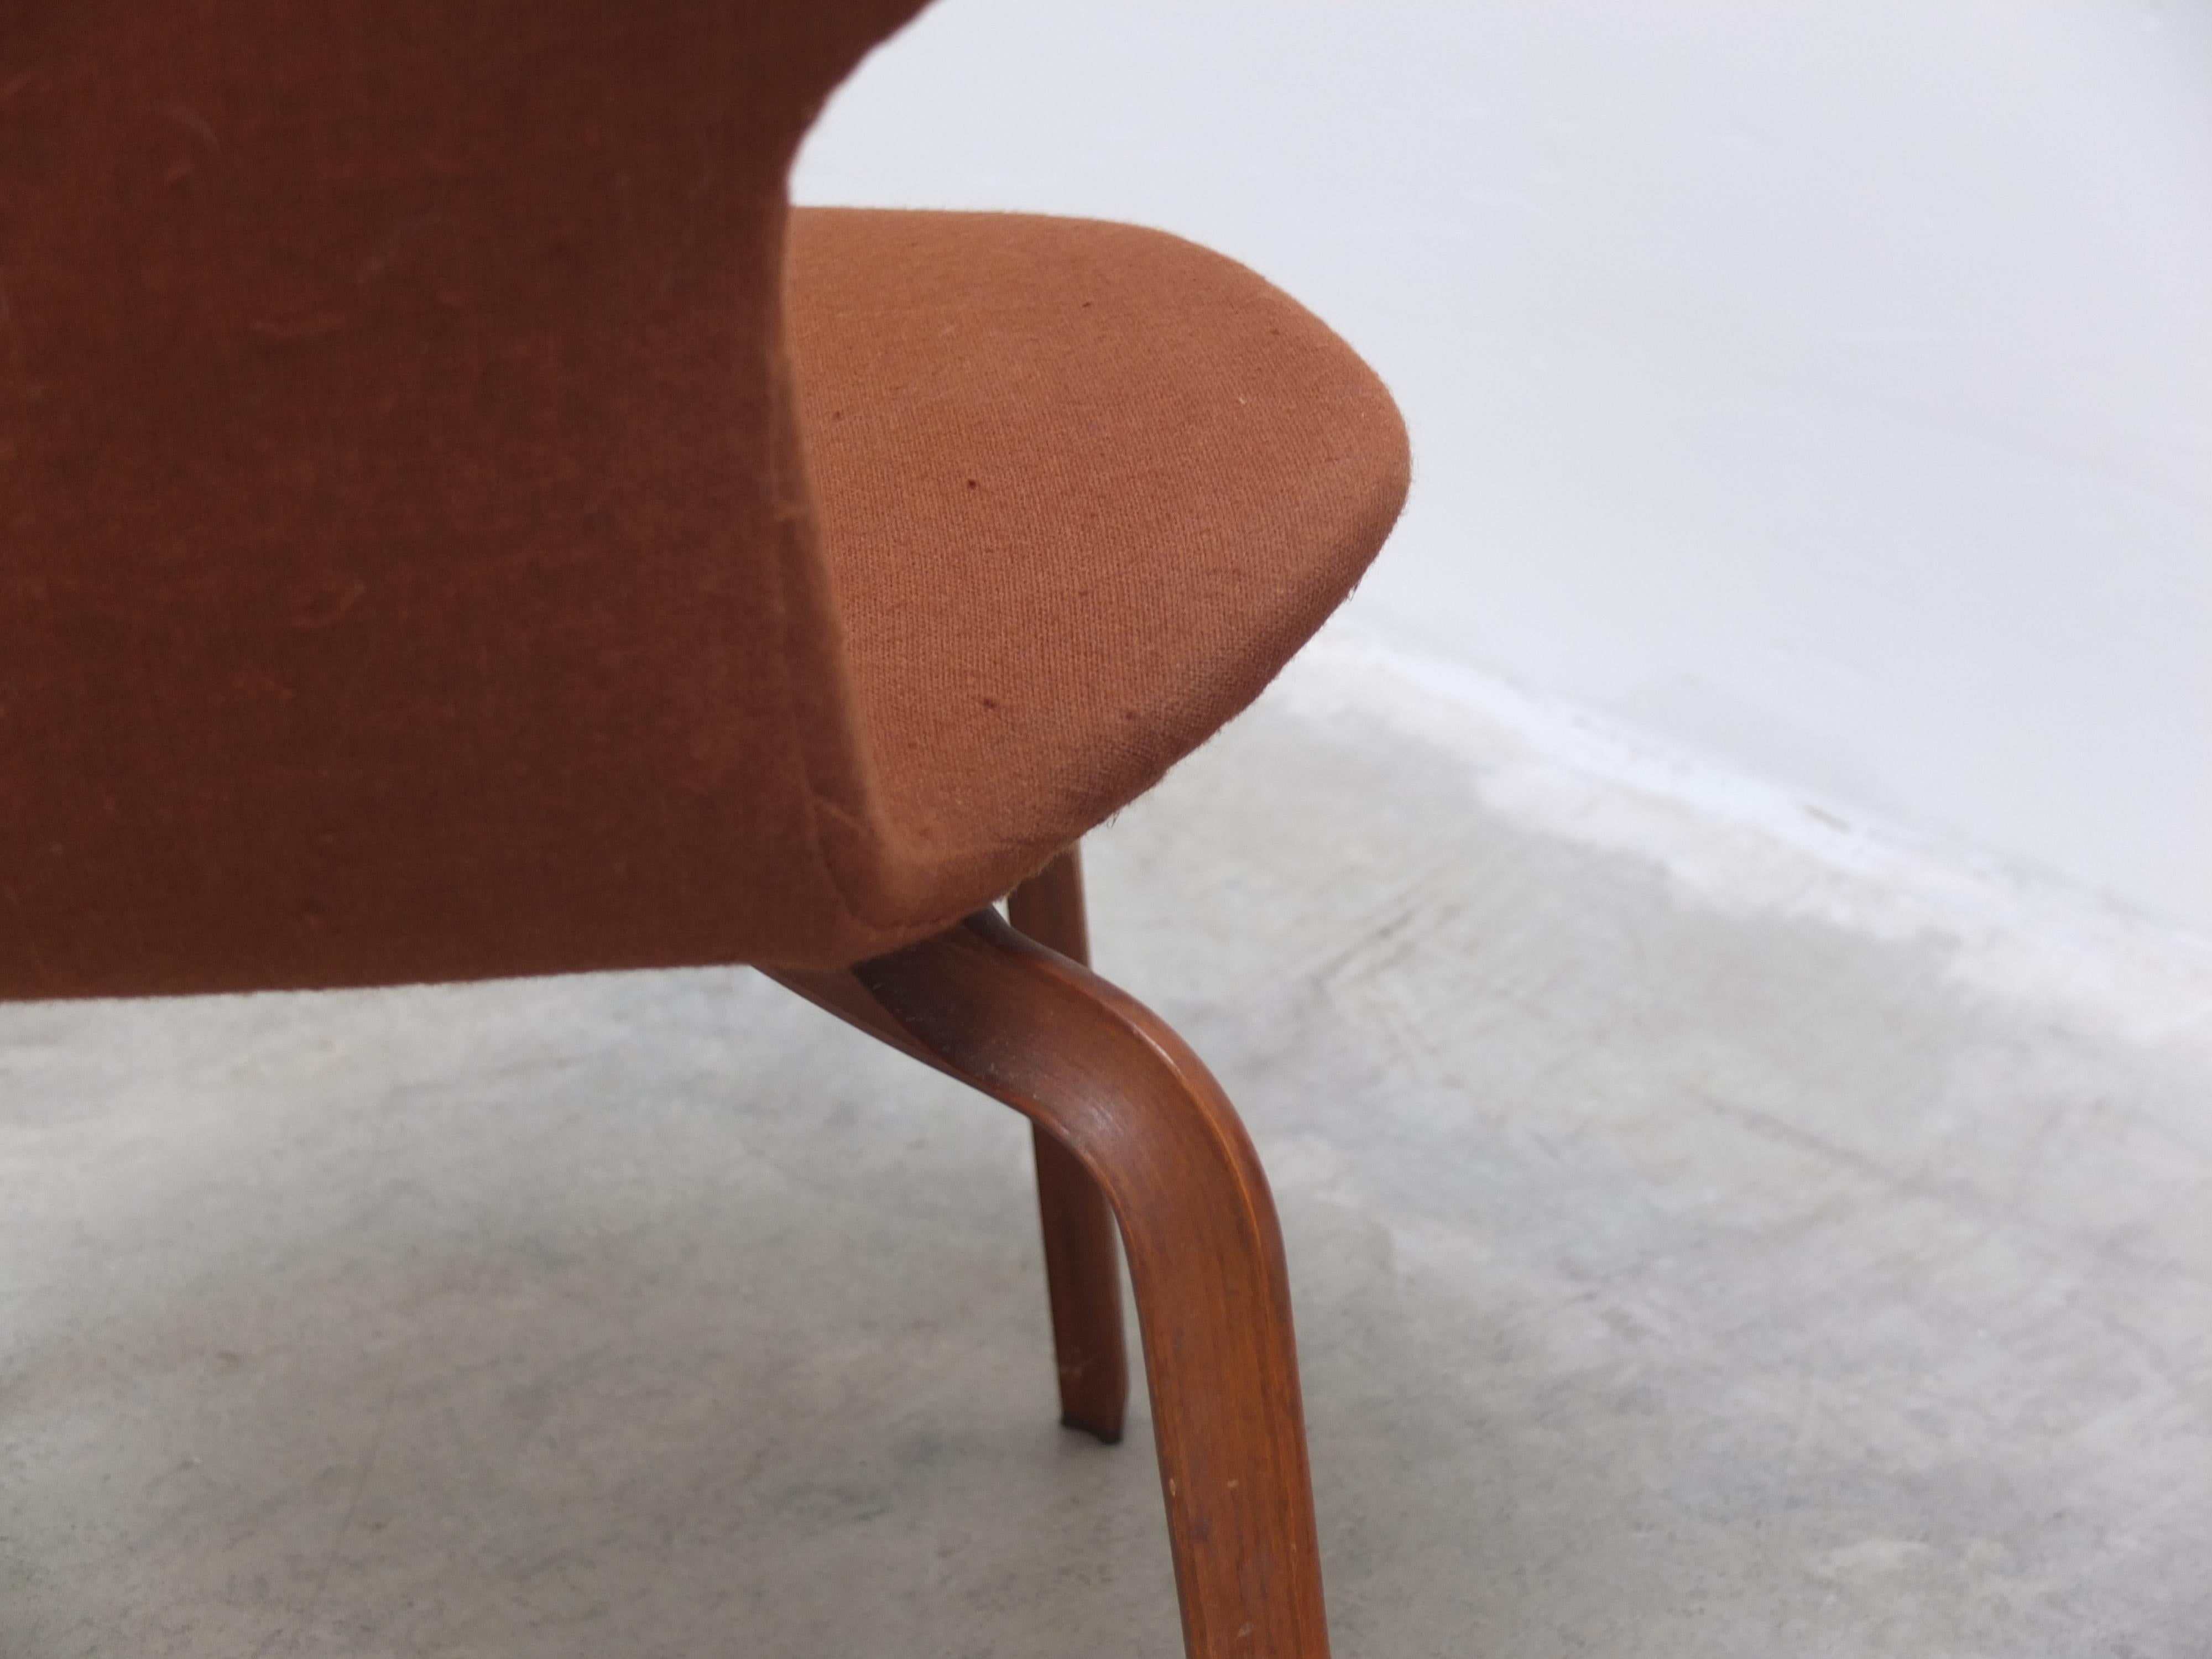 Set of 4 1st Edition 'Grand Prix' Chairs by Arne Jacobsen for Fritz Hansen, 1957 For Sale 7